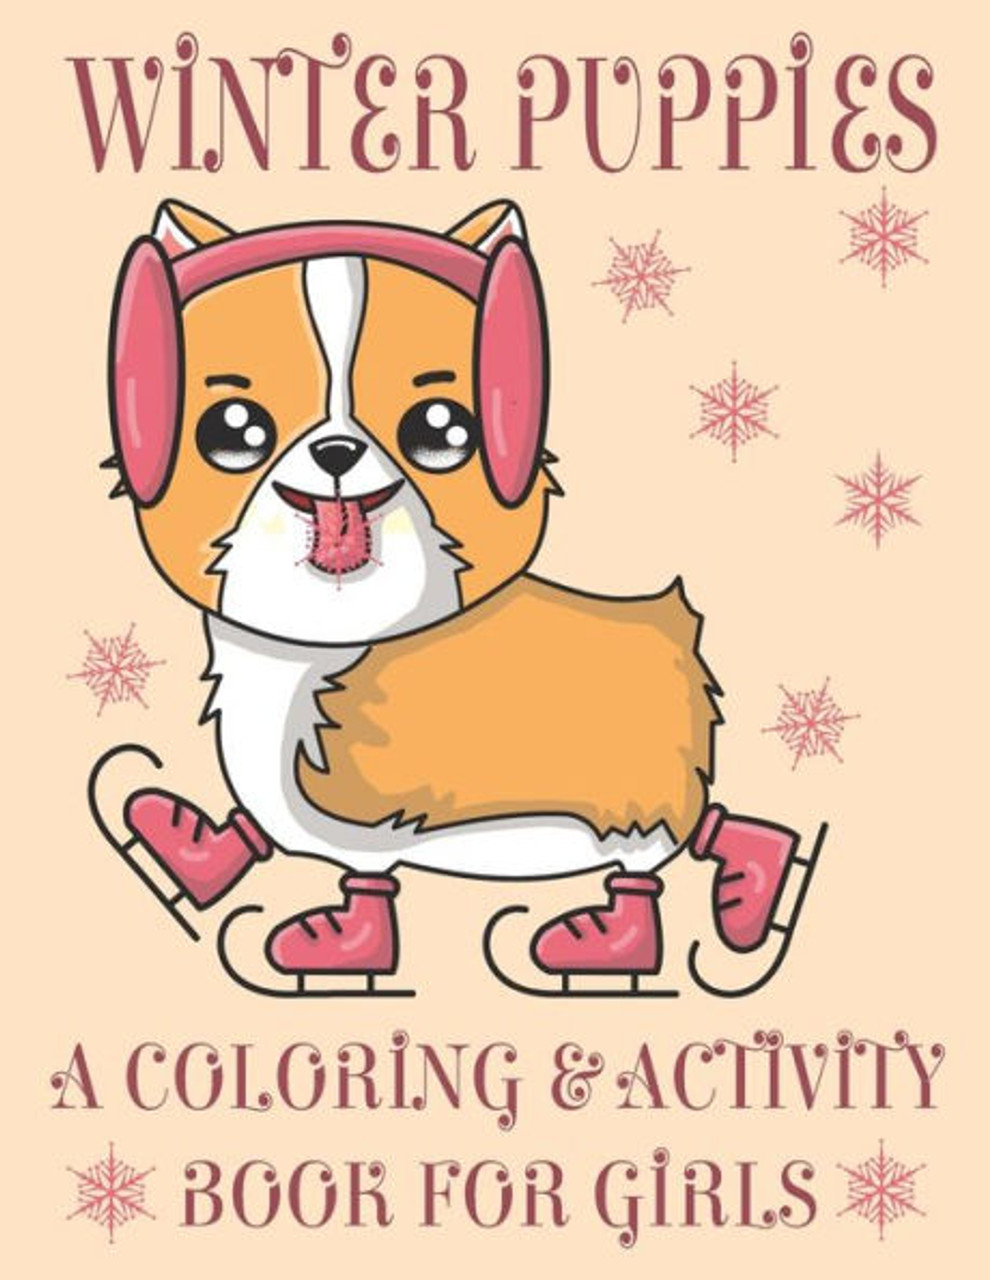 Winter puppies a coloring activity book for girls adorable puppy illustrations with cold weather maze and word search games